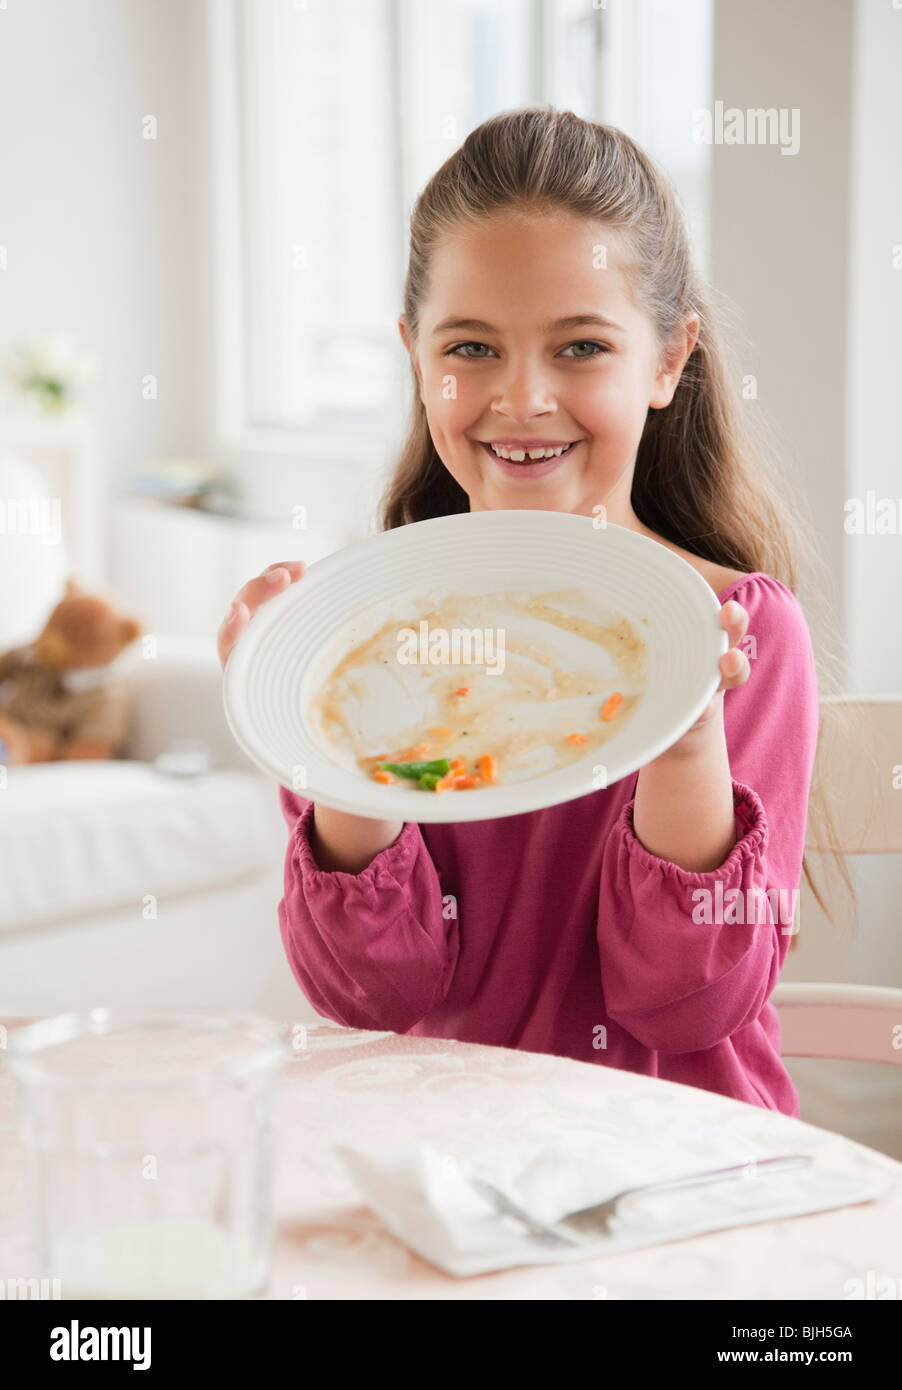 Young girl holding plate Stock Photo